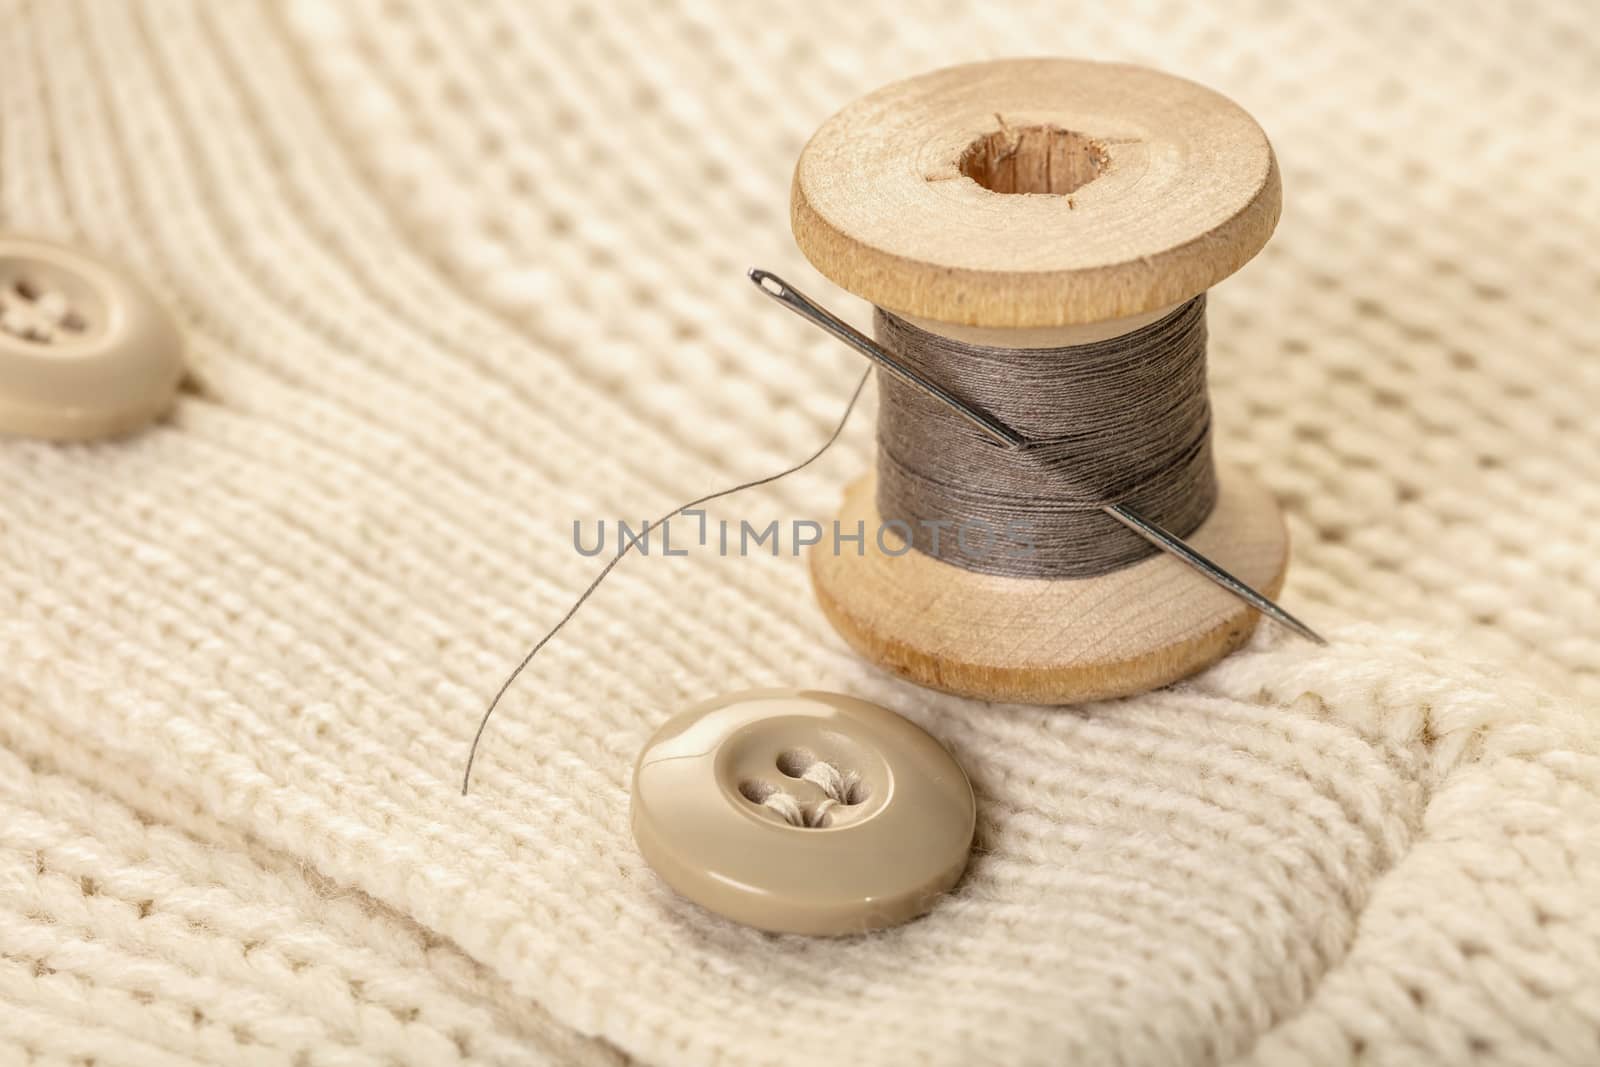 spool of thread with a needle on white knitted clothes